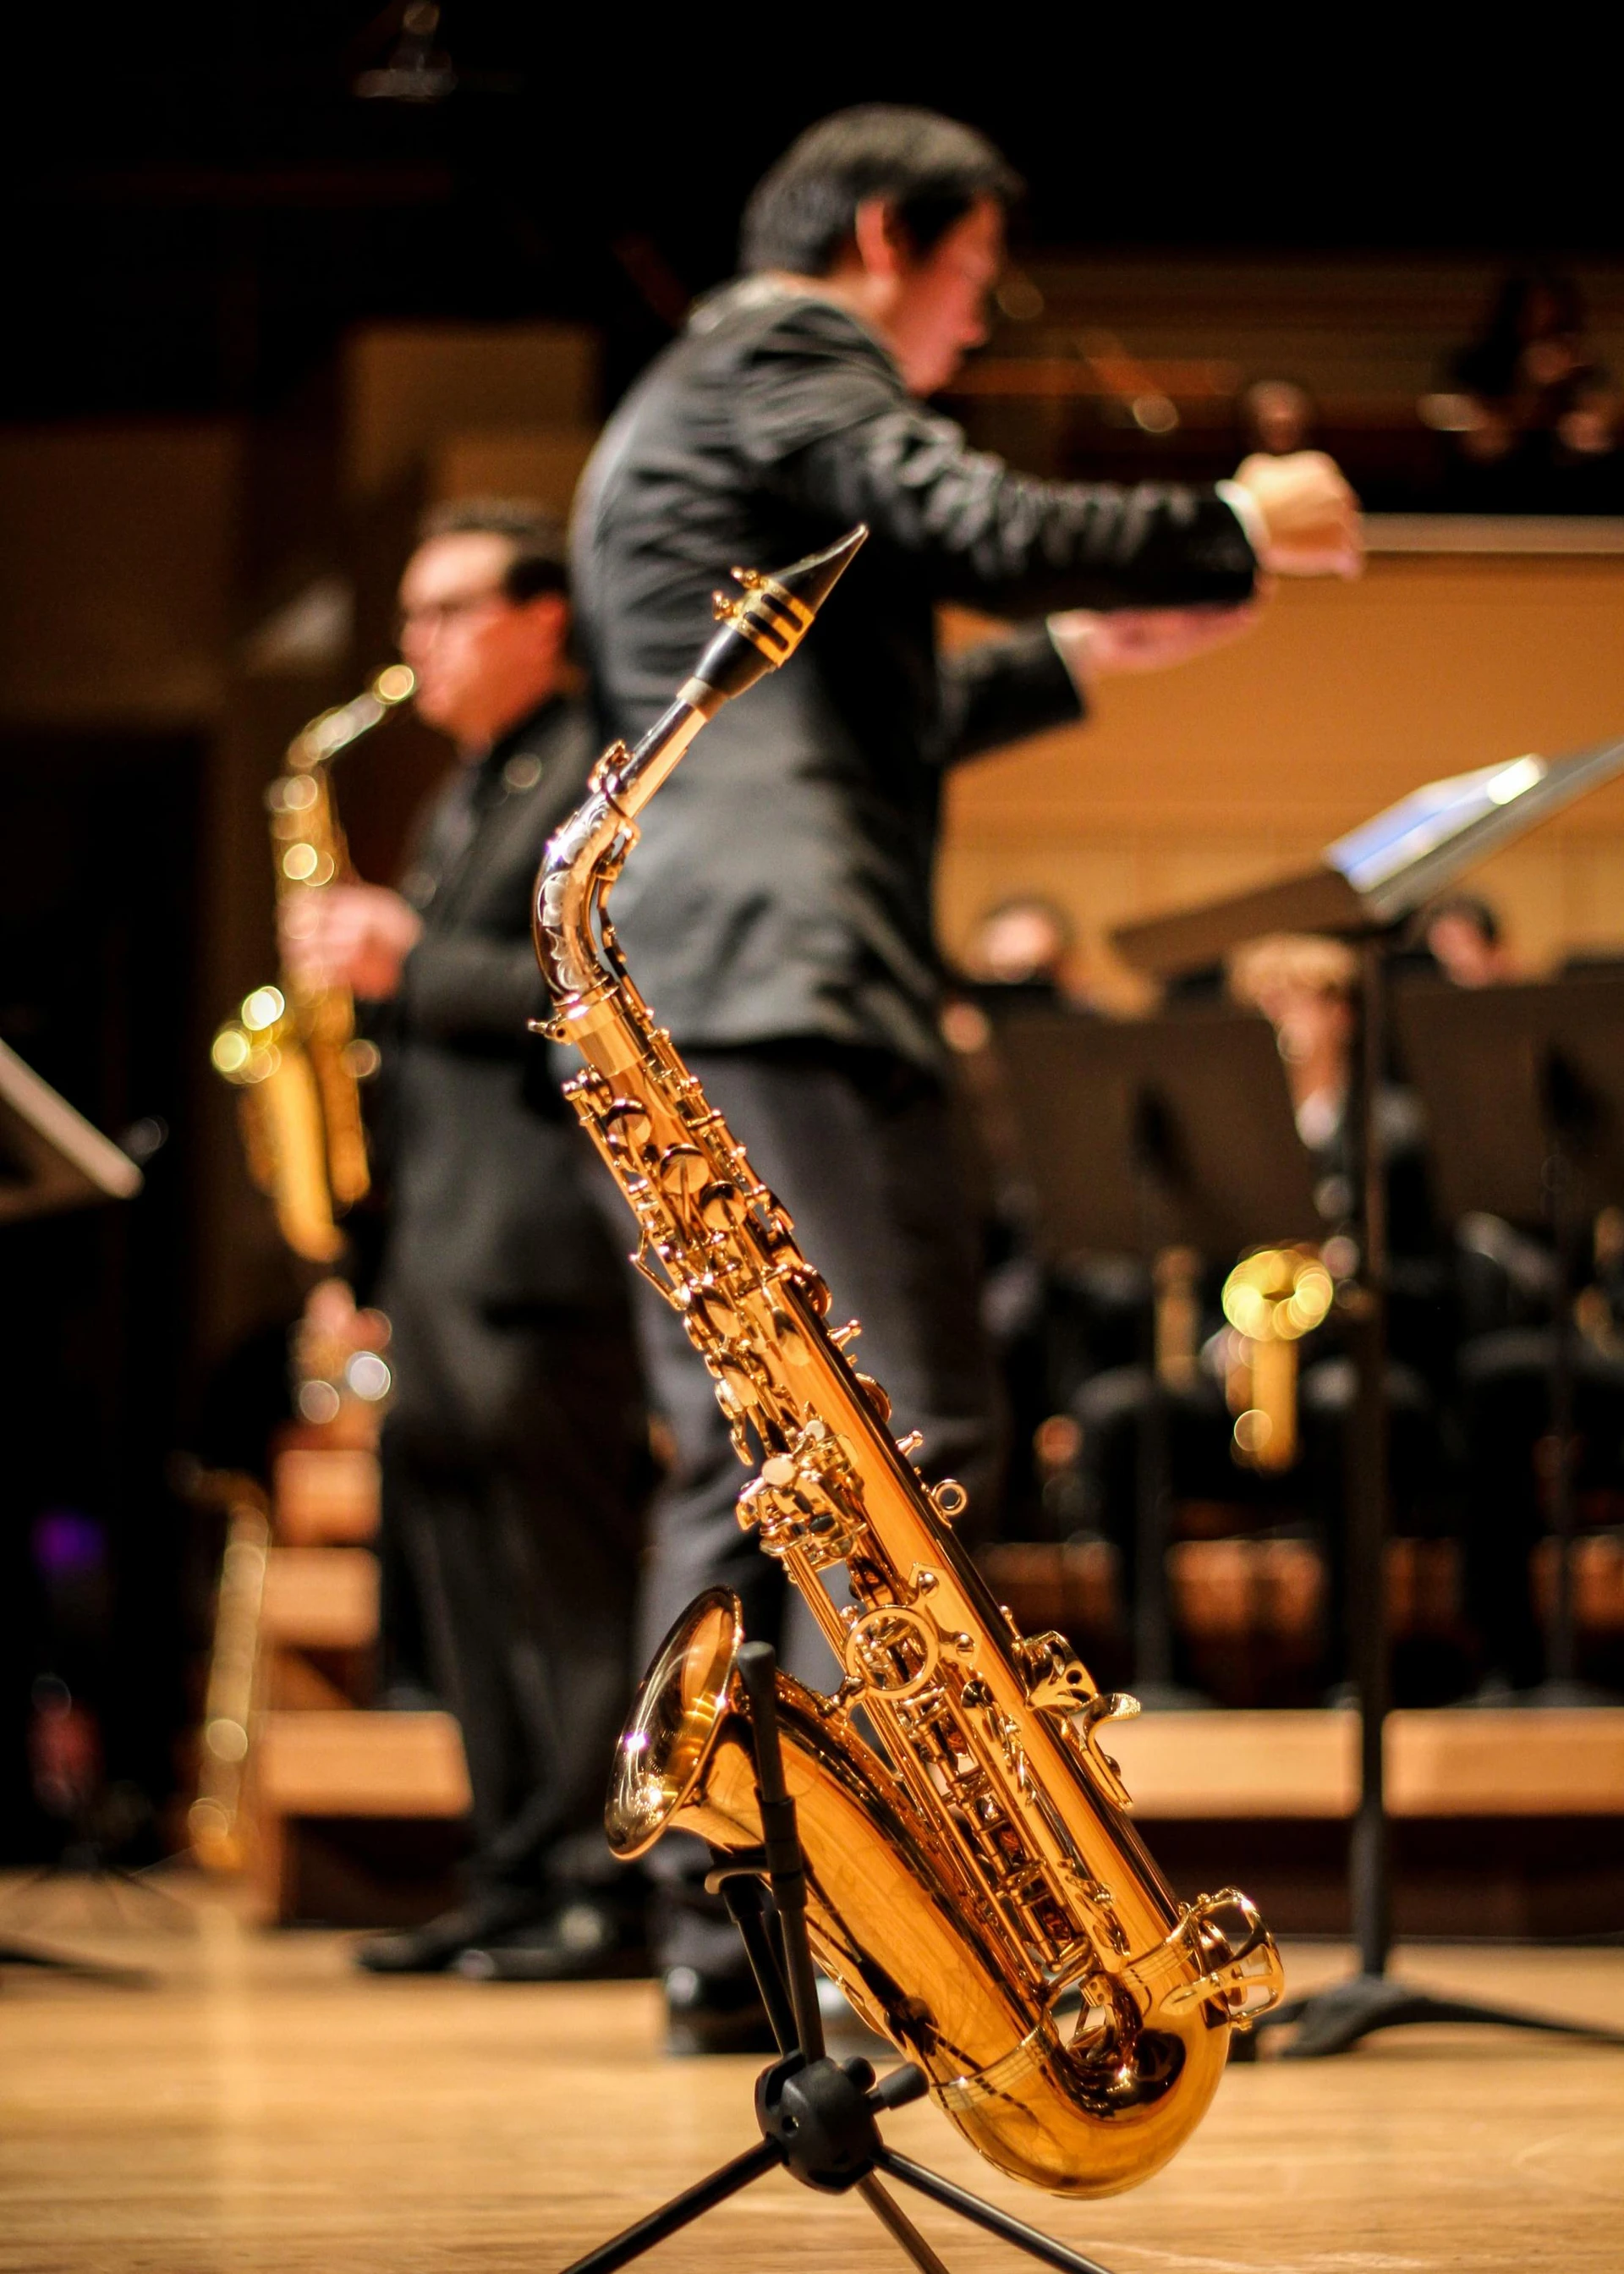 A photo of a shiny saxophone, and in the background a conducter is leading an ensemble